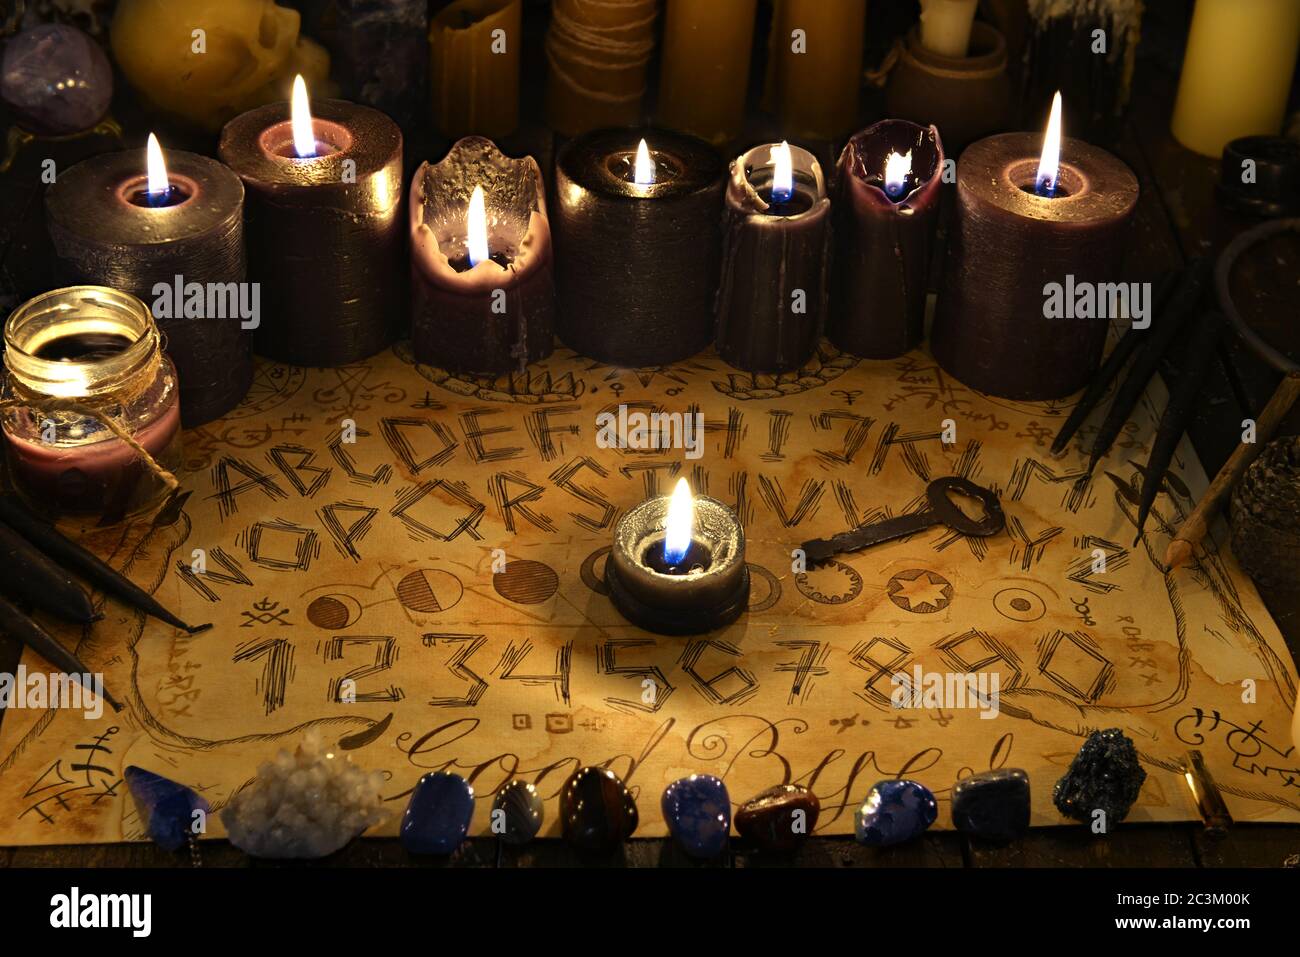 Talking spiritual board with black candles and old key. Wicca, esoteric and occult background with vintage magic objects for mystic rituals. Halloween Stock Photo